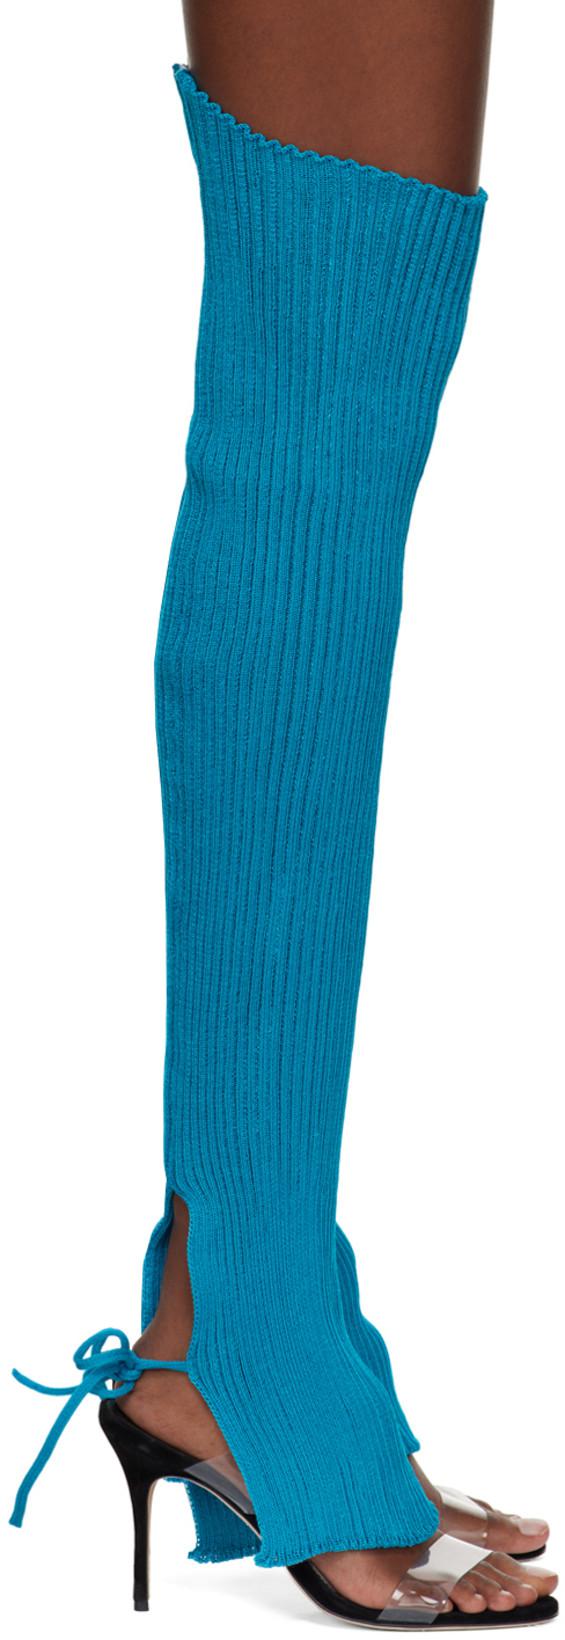 SSENSE Exclusive Blue Emma String Leg Warmers by A. ROEGE HOVE